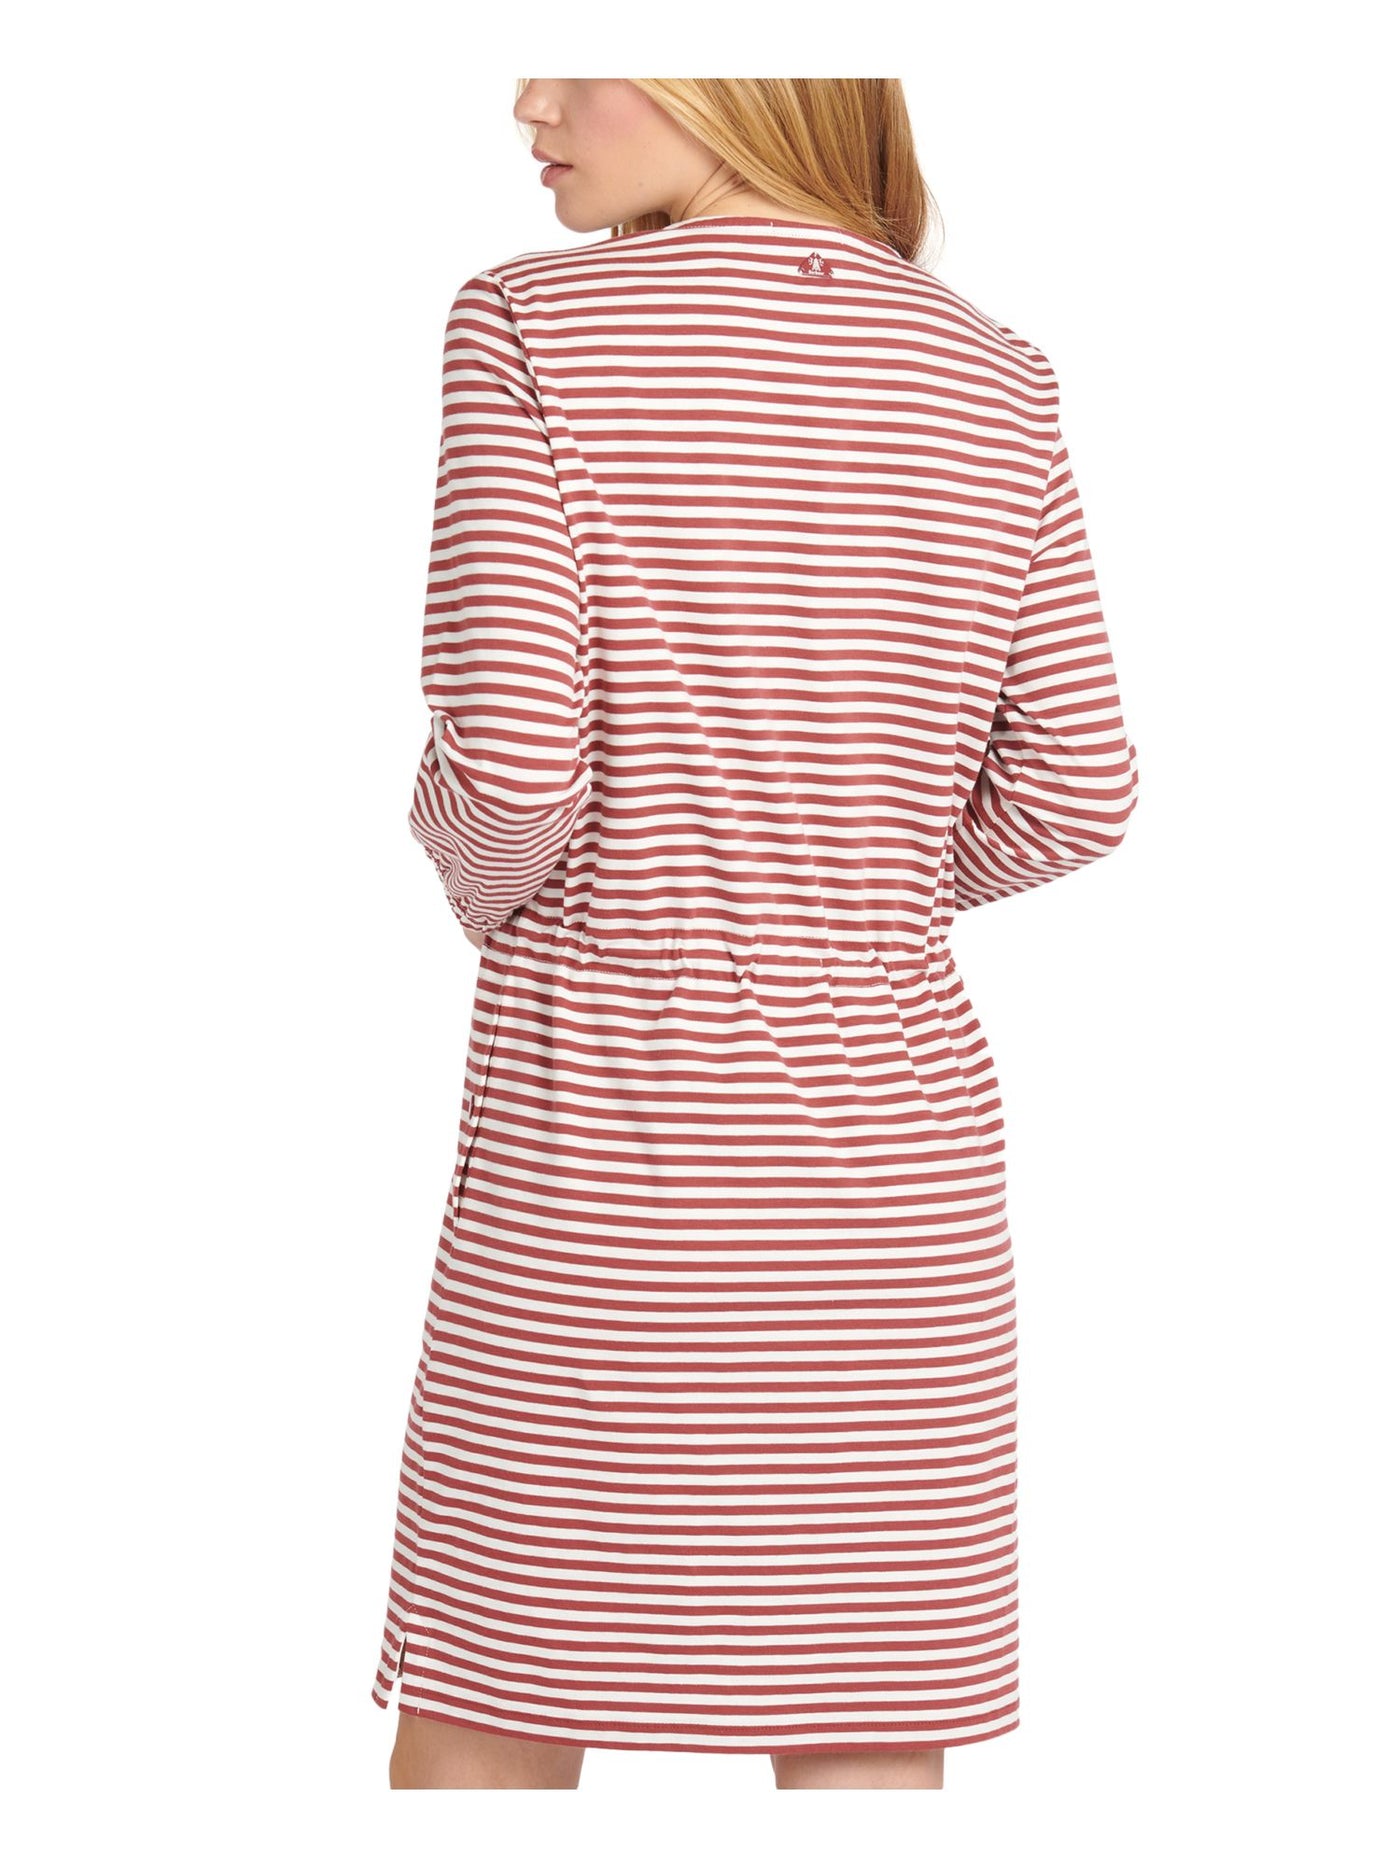 BARBOUR Womens Red Stretch Striped Scoop Neck Above The Knee Wear To Work Sheath Dress 10